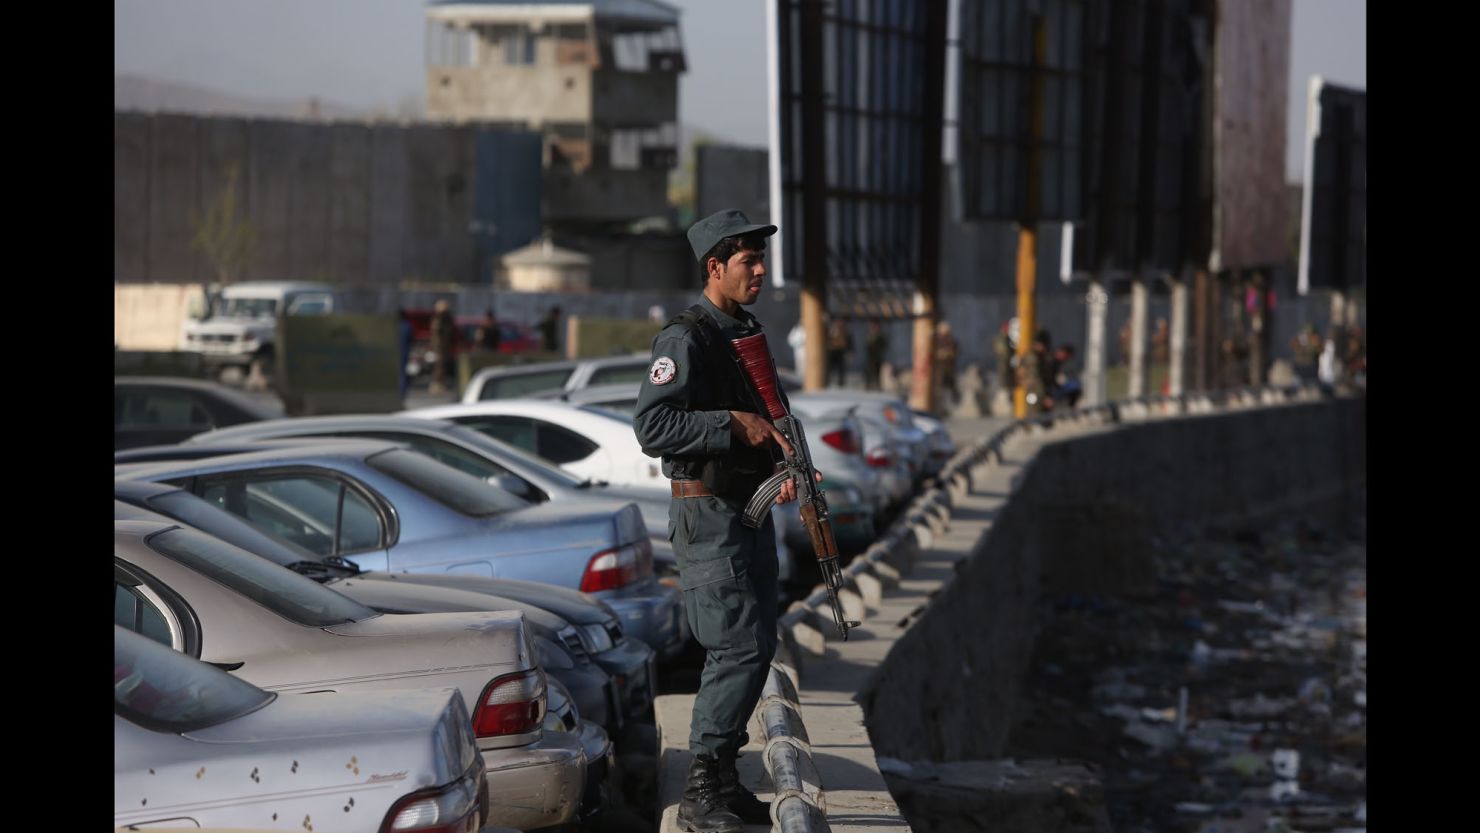 Security forces stand by Wednesday after a suicide blast near government offices in the Afghan capital.